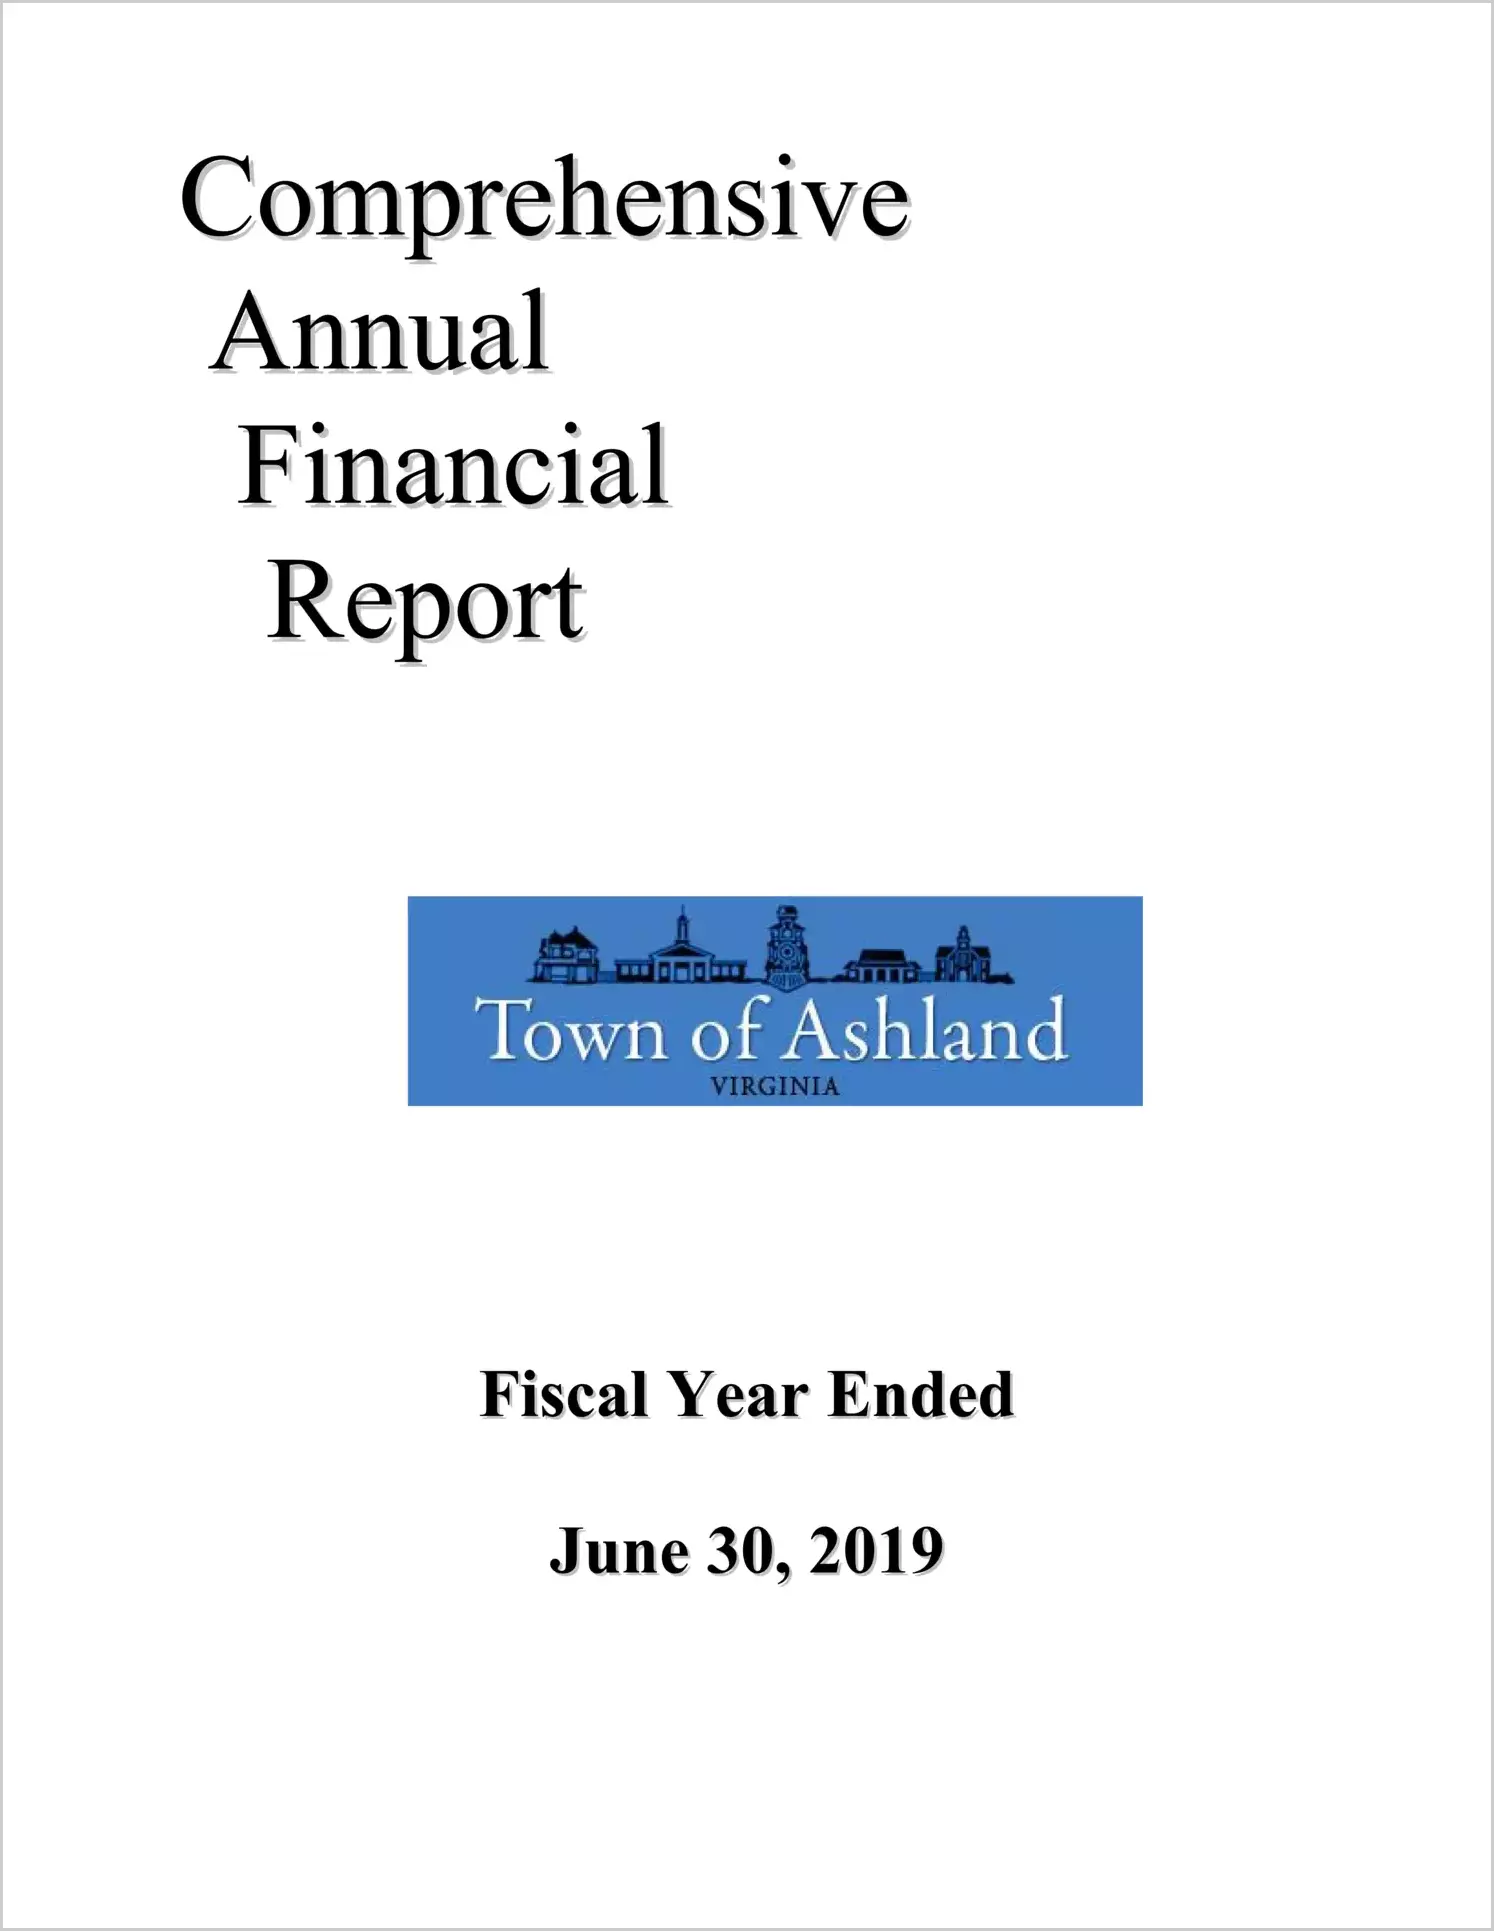 2019 Annual Financial Report for Town of Ashland